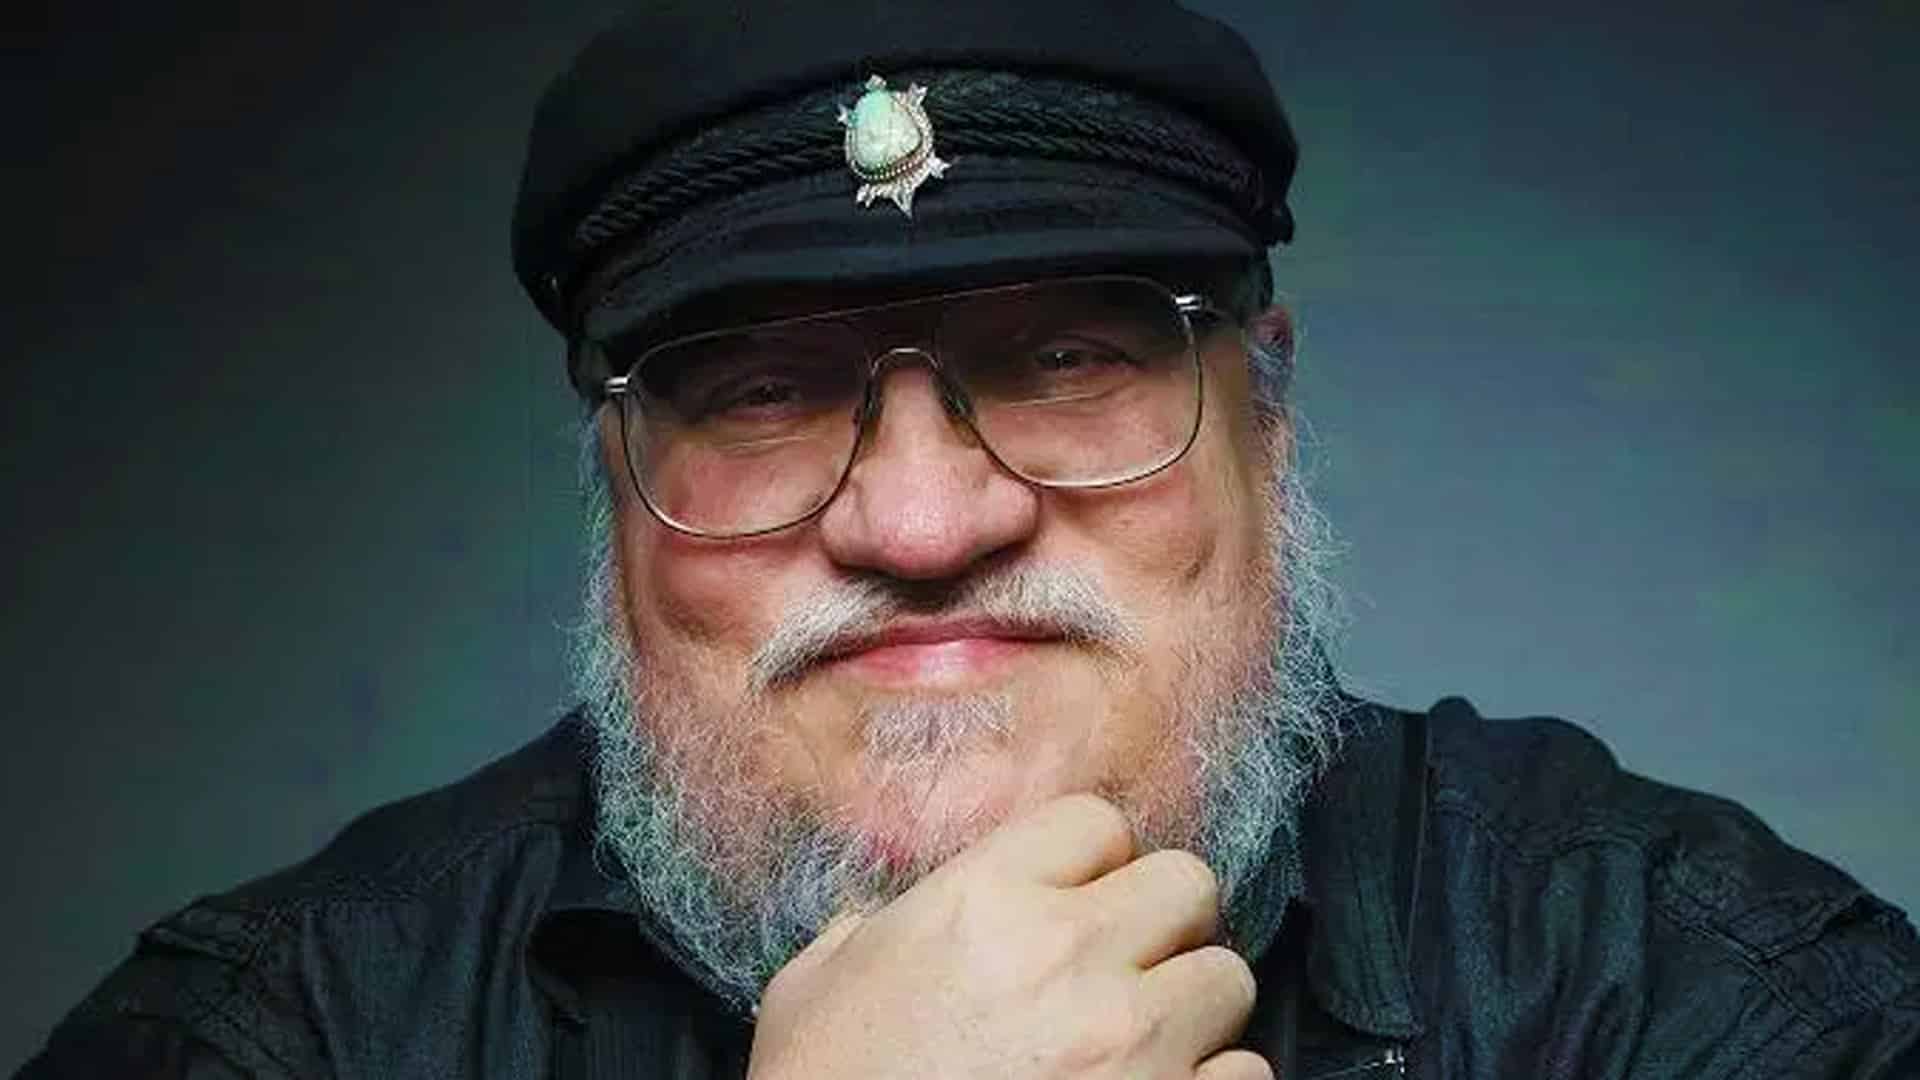 The Winds of Winter Delayed George RR Martin may not Release TWOW Book in 2020 Anymore